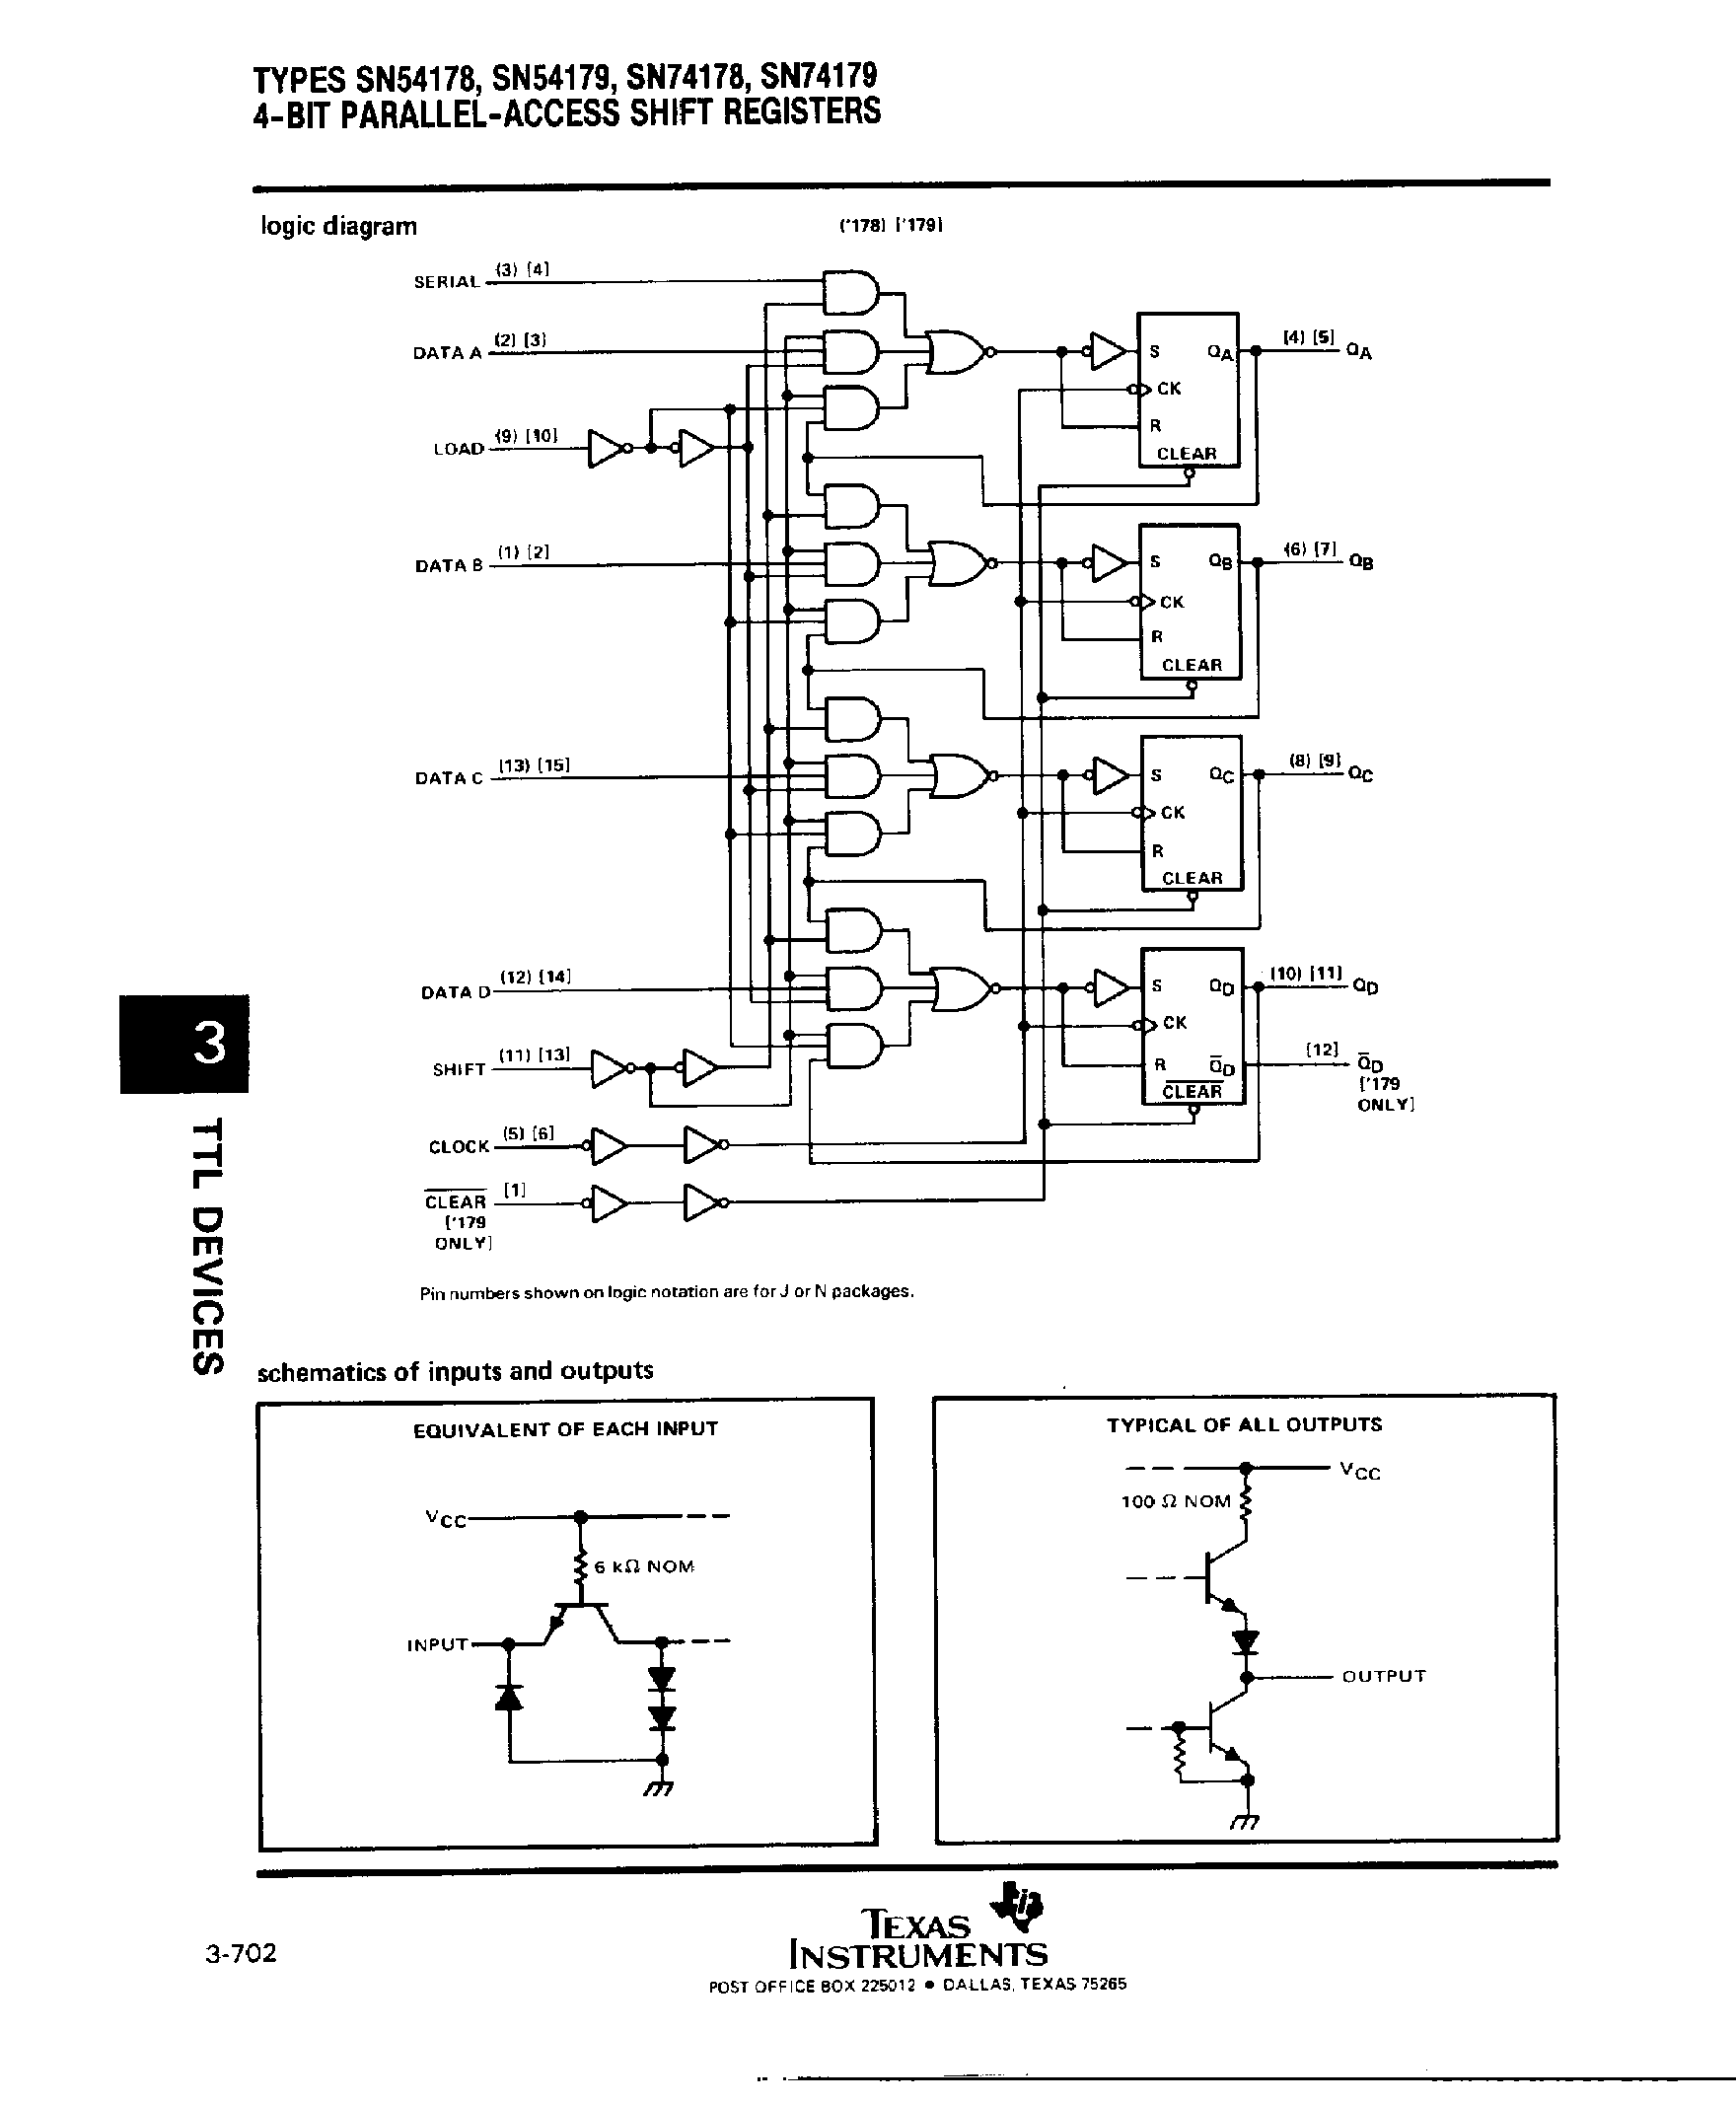 Datasheet SN74179 - 4 Bit Parallel Access Shift Registers page 2